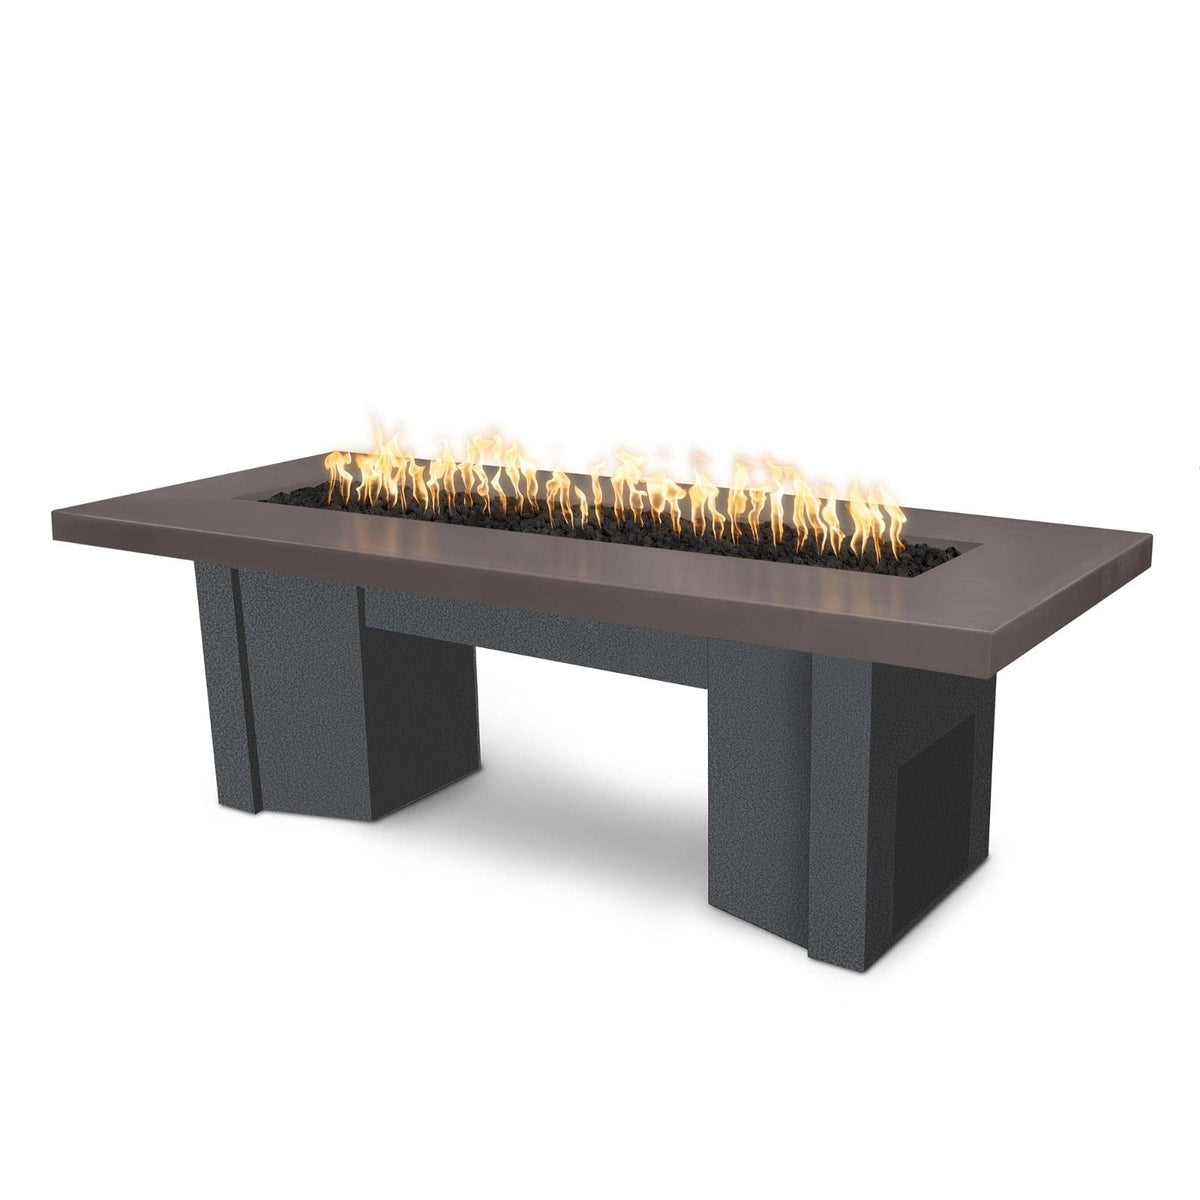 The Outdoor Plus Fire Features Chestnut (-CST) / Silver Vein Powder Coated Steel (-SLV) The Outdoor Plus 60&quot; Alameda Fire Table Smooth Concrete in Liquid Propane - 12V Electronic Ignition / OPT-ALMGFRC60E12V-LP